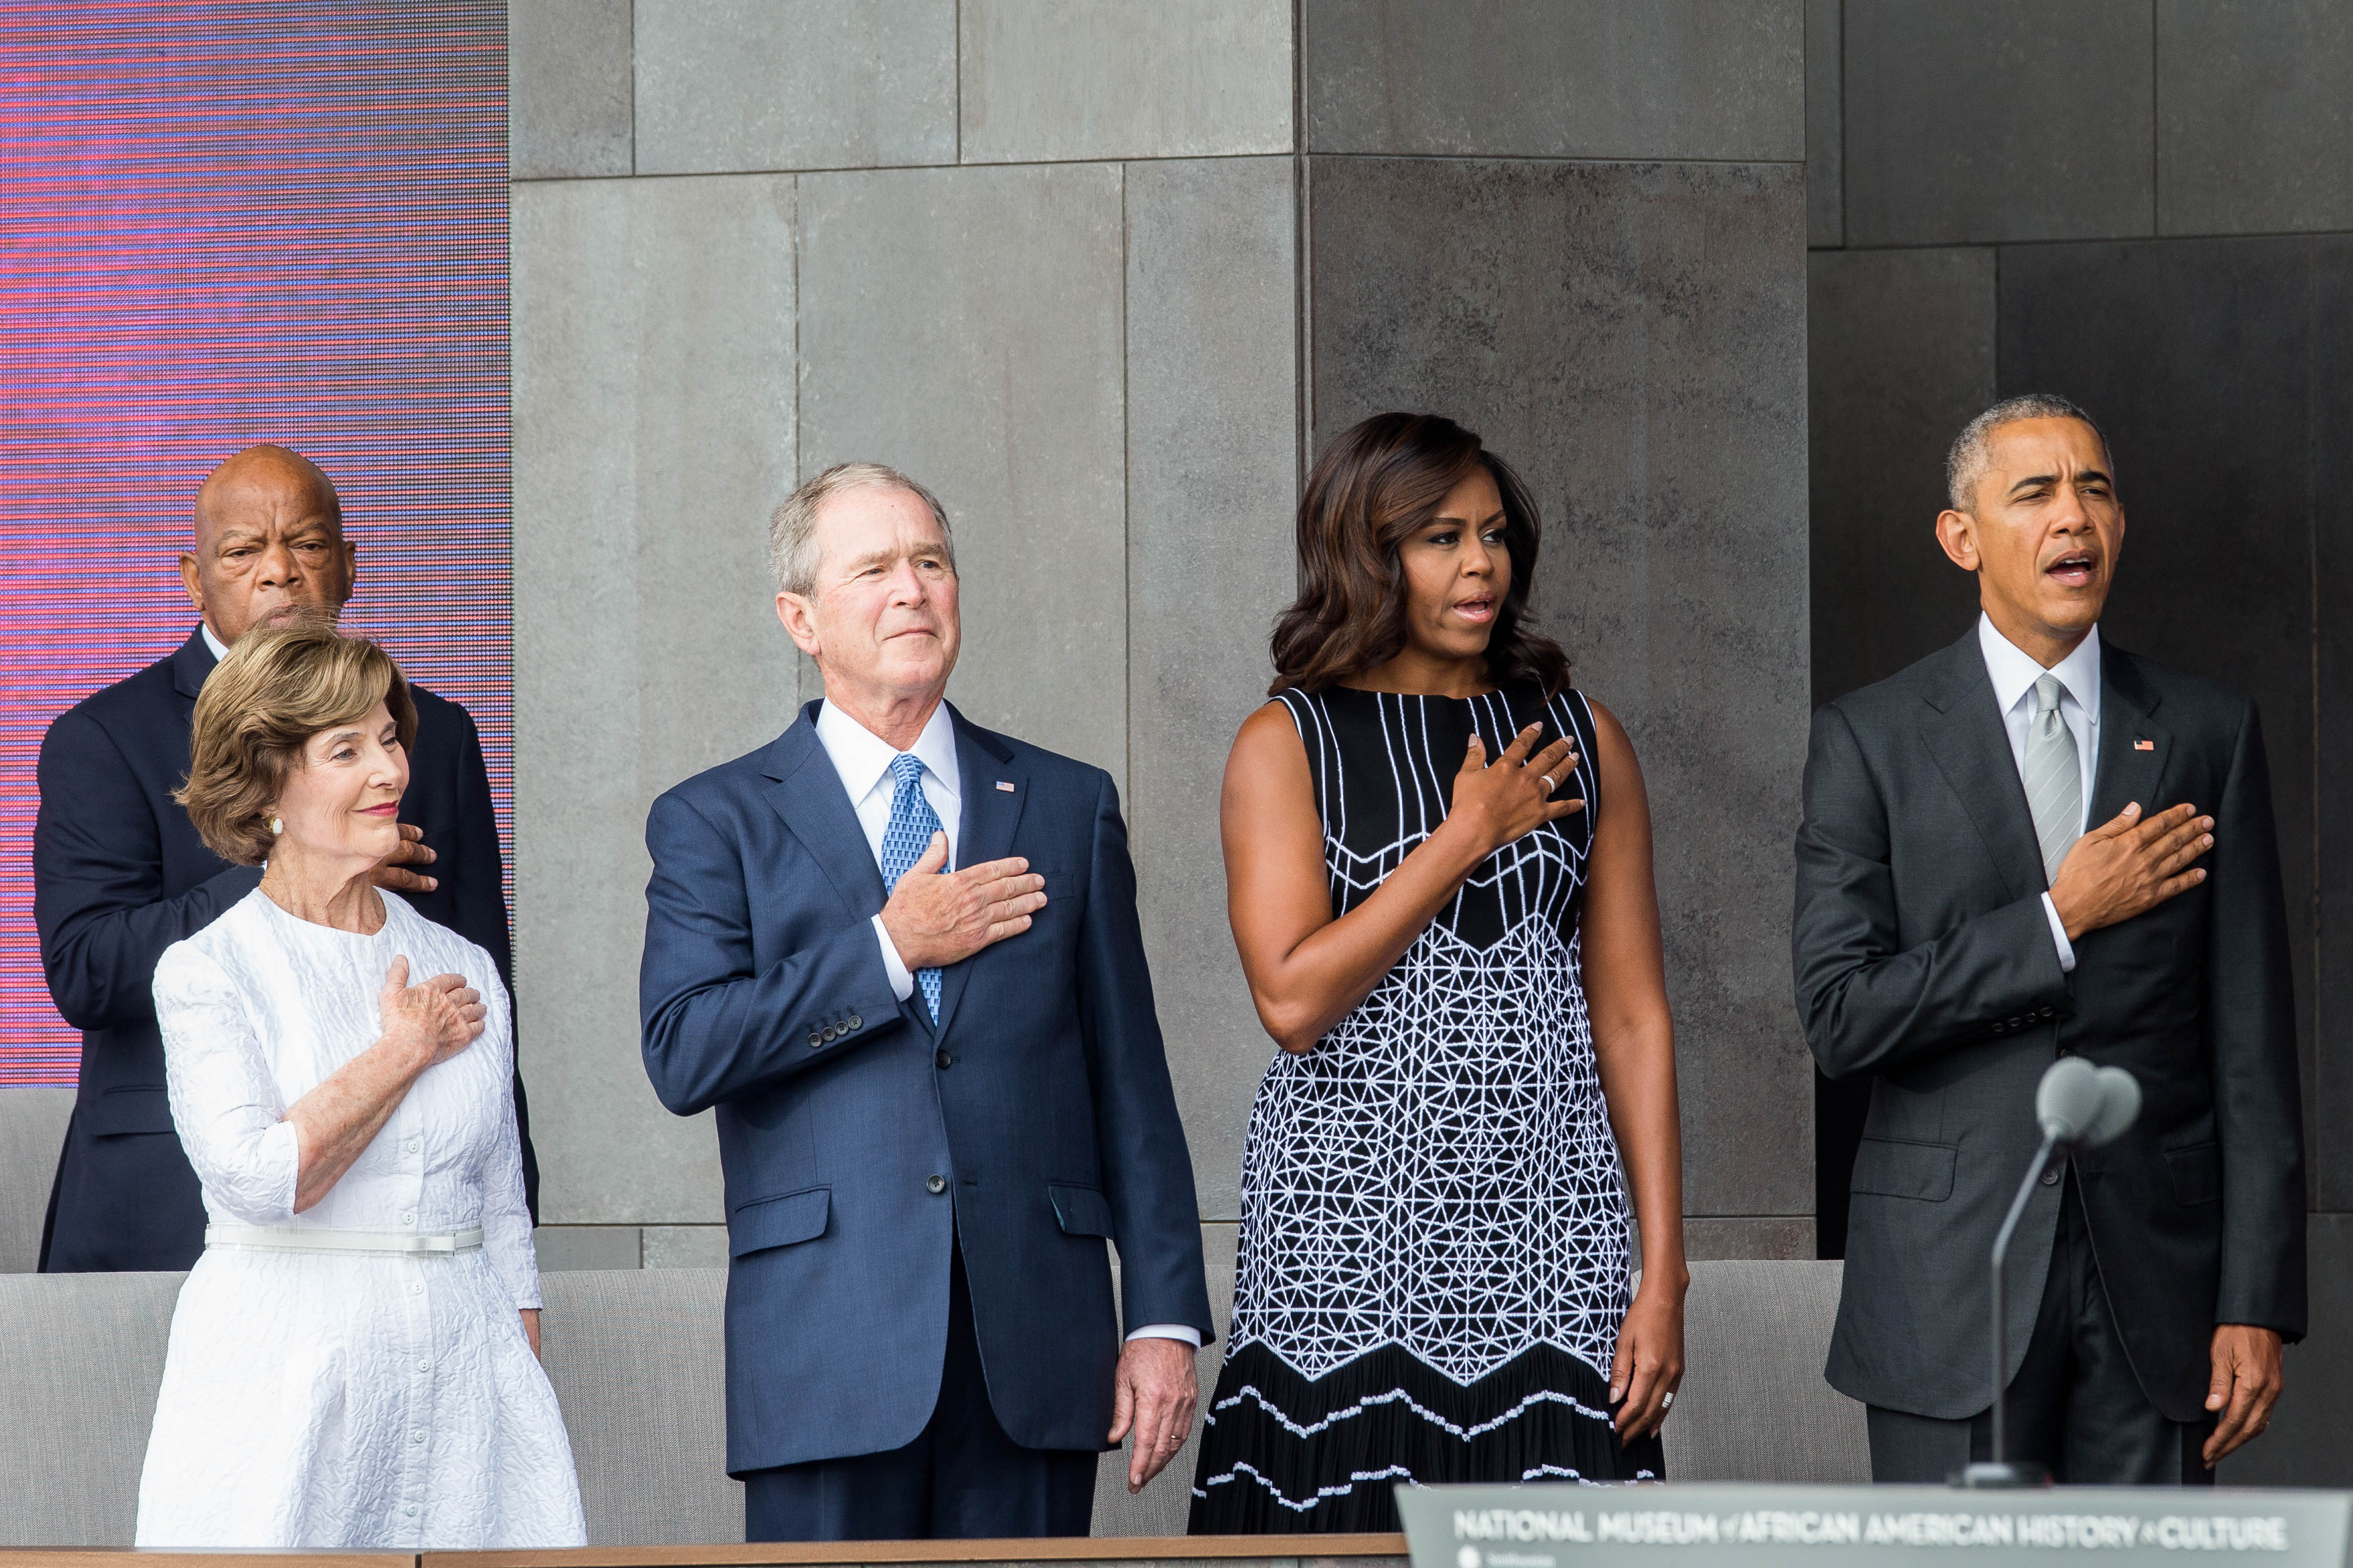 Former First Lady Laura Bush, former President George W. Bush, First Lady Michelle Obama and President Barack Obama stand for the National Anthem during the opening ceremony for the Smithsonian National Museum of African American History and Culture on Sept. 24, 2016 in Washington, D.C. (Zach Gibson—AFP/Getty Images)